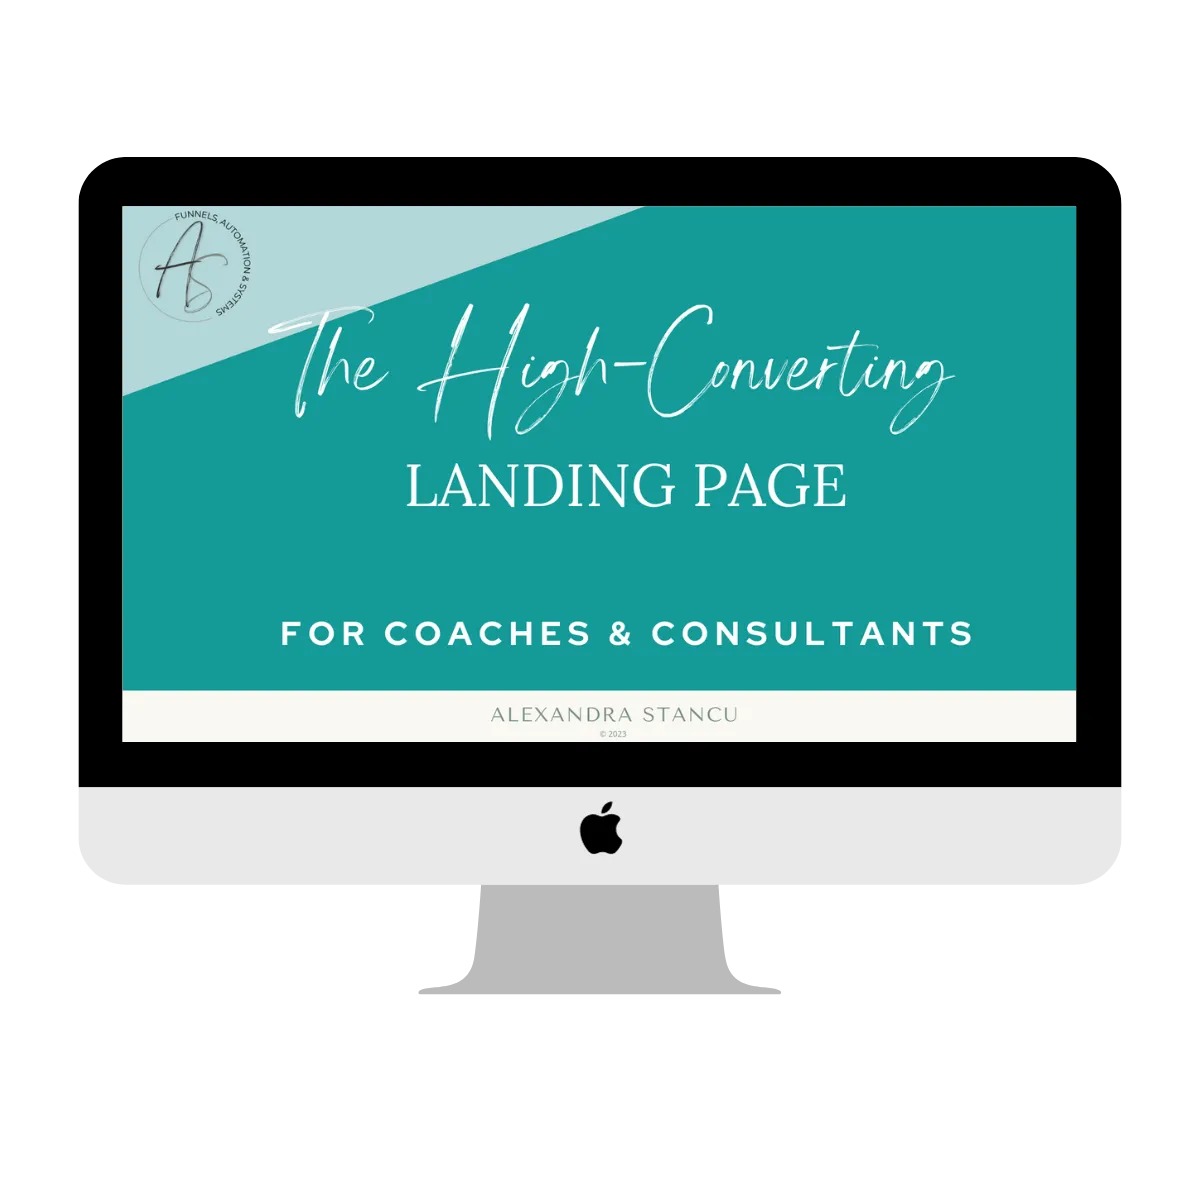 Free Download The high-converting landing page guide for coaches and consultants